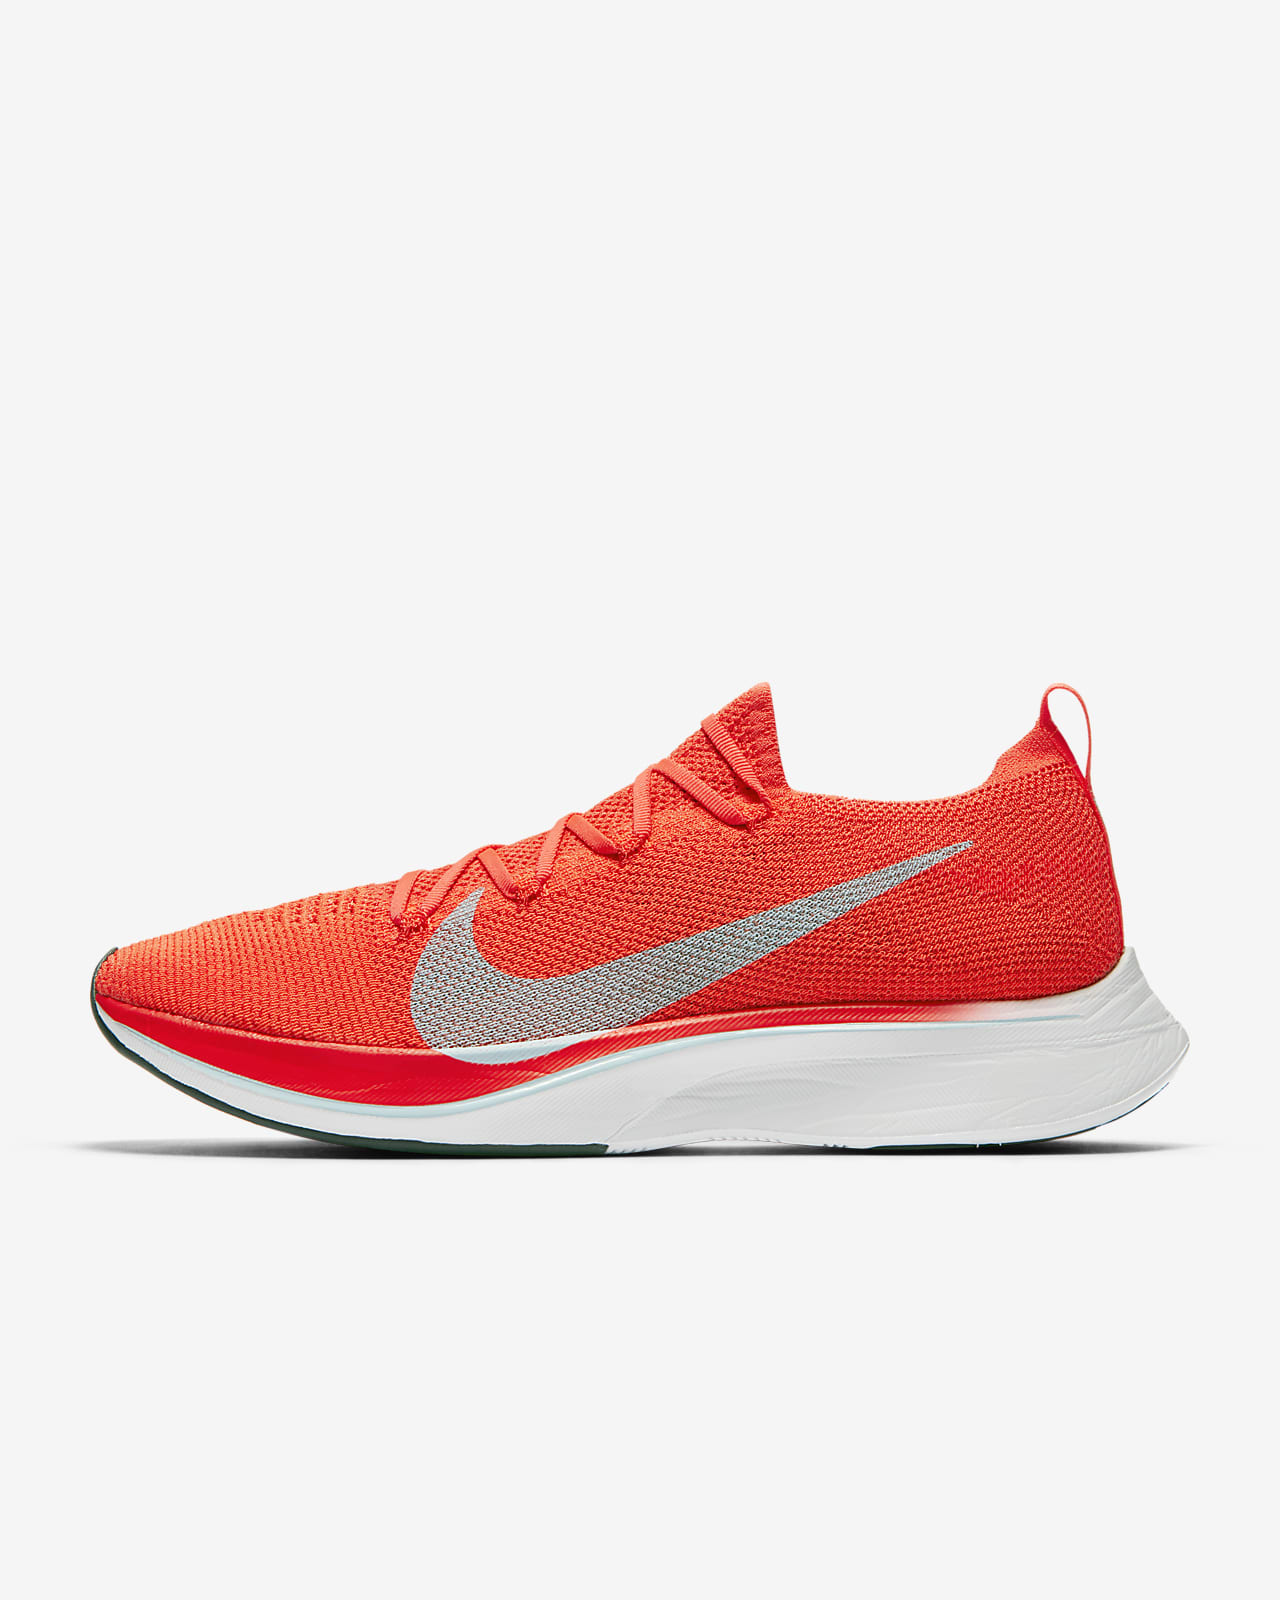 nike vaporfly 4 review